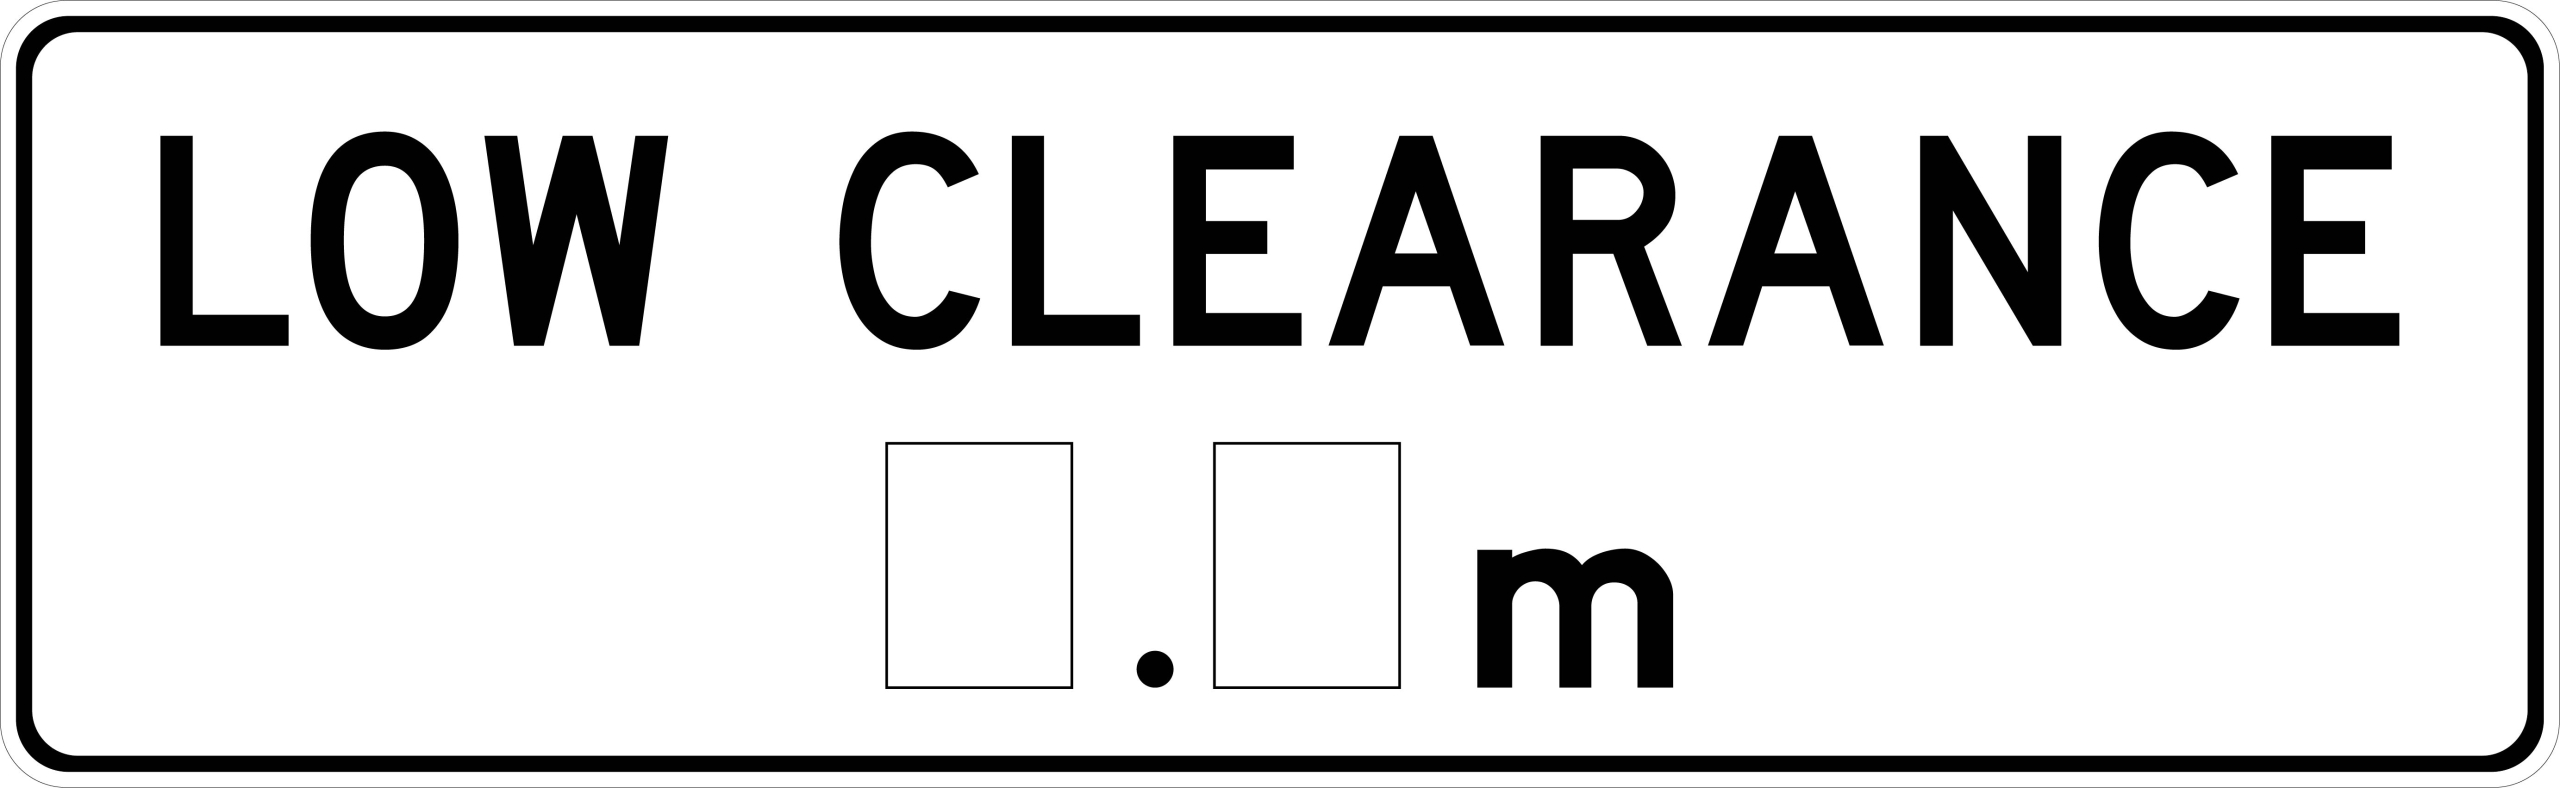 R6-11-Low-Clearance